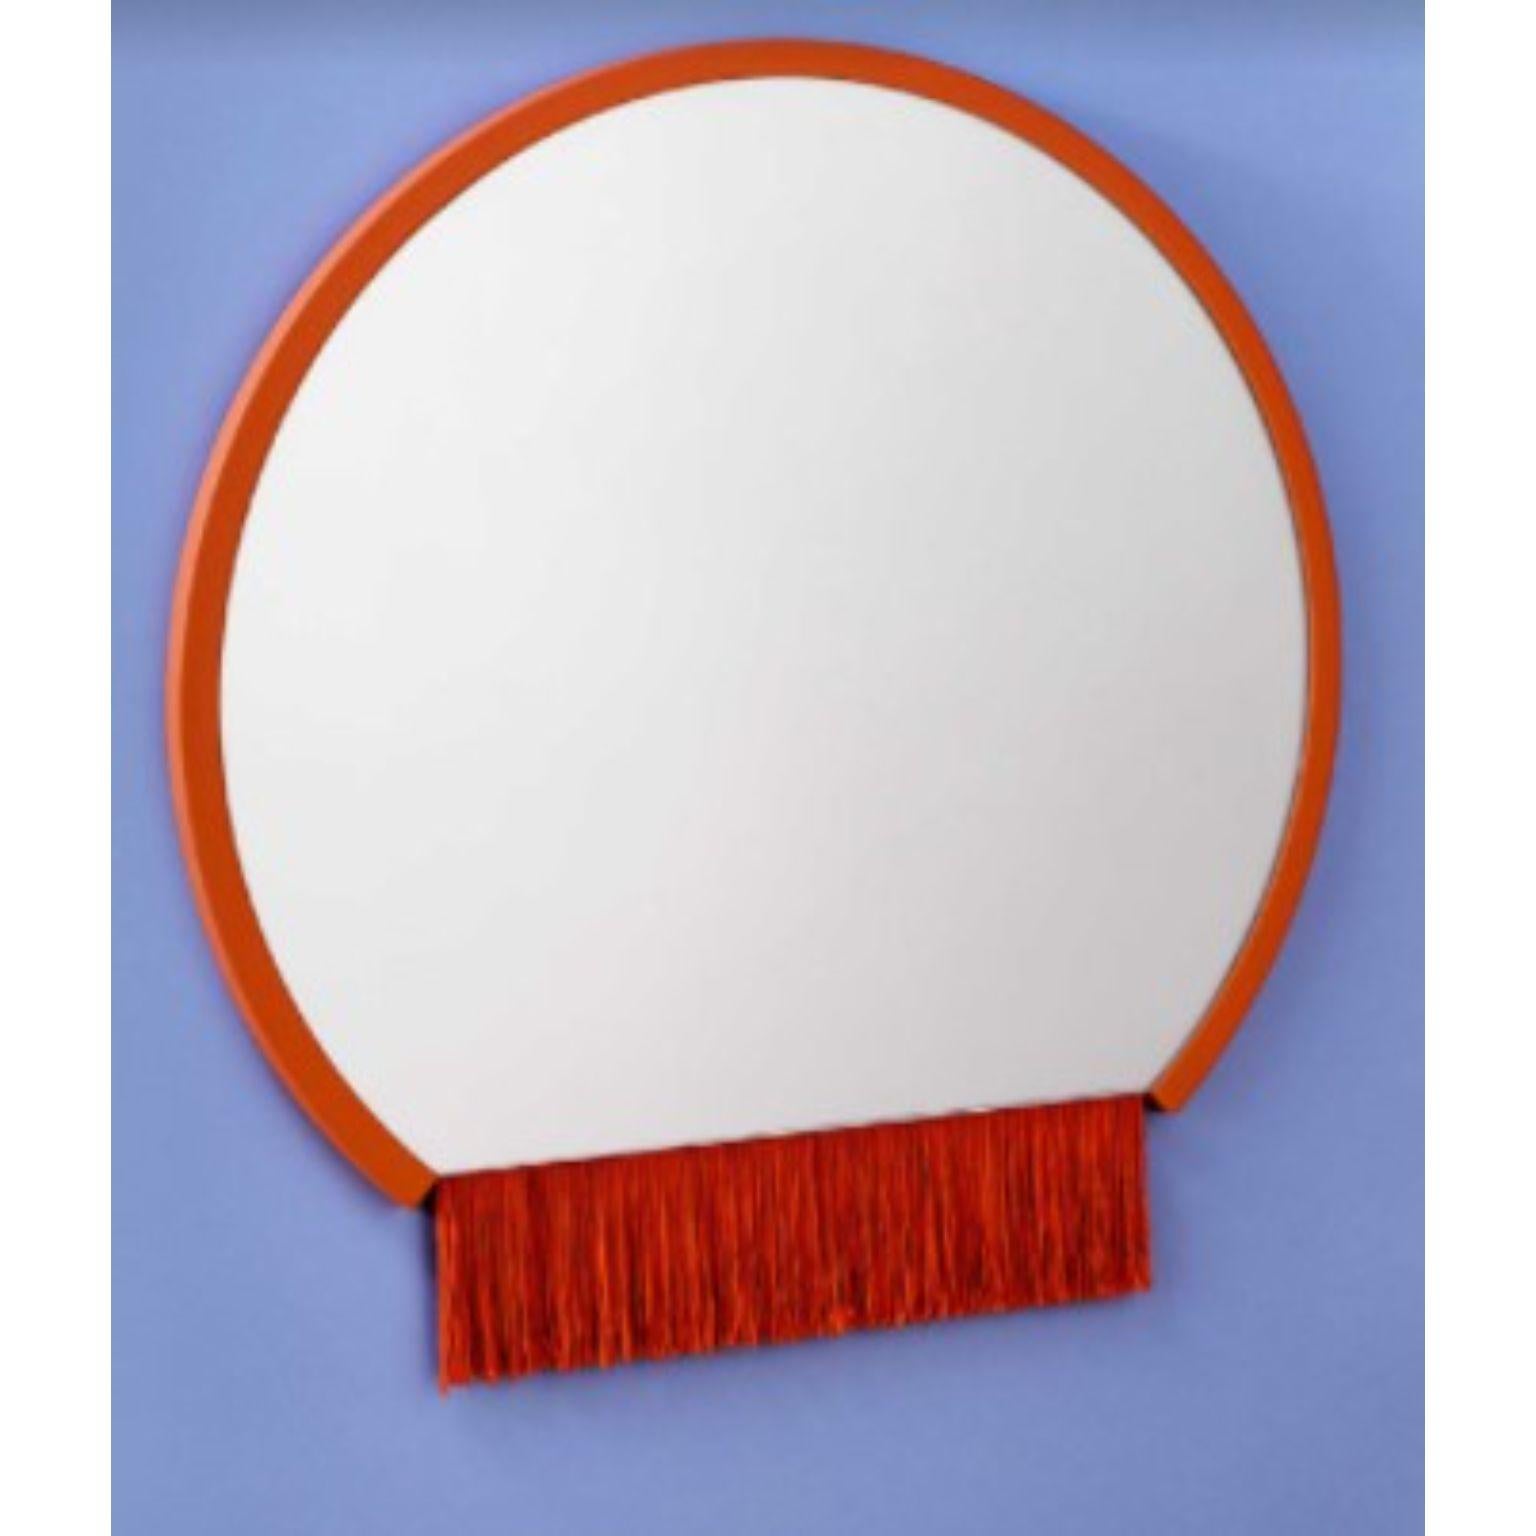 Boudoir large wall mirror by Tero Kuitunen
Material: glass mirror, mdf board, textile fringes.
Dimensions: D 68 x W 68 x H 1.6 cm
Also available : different size, models and colors. 

Playful wall mirrors with fringe detail.

Designer Tero